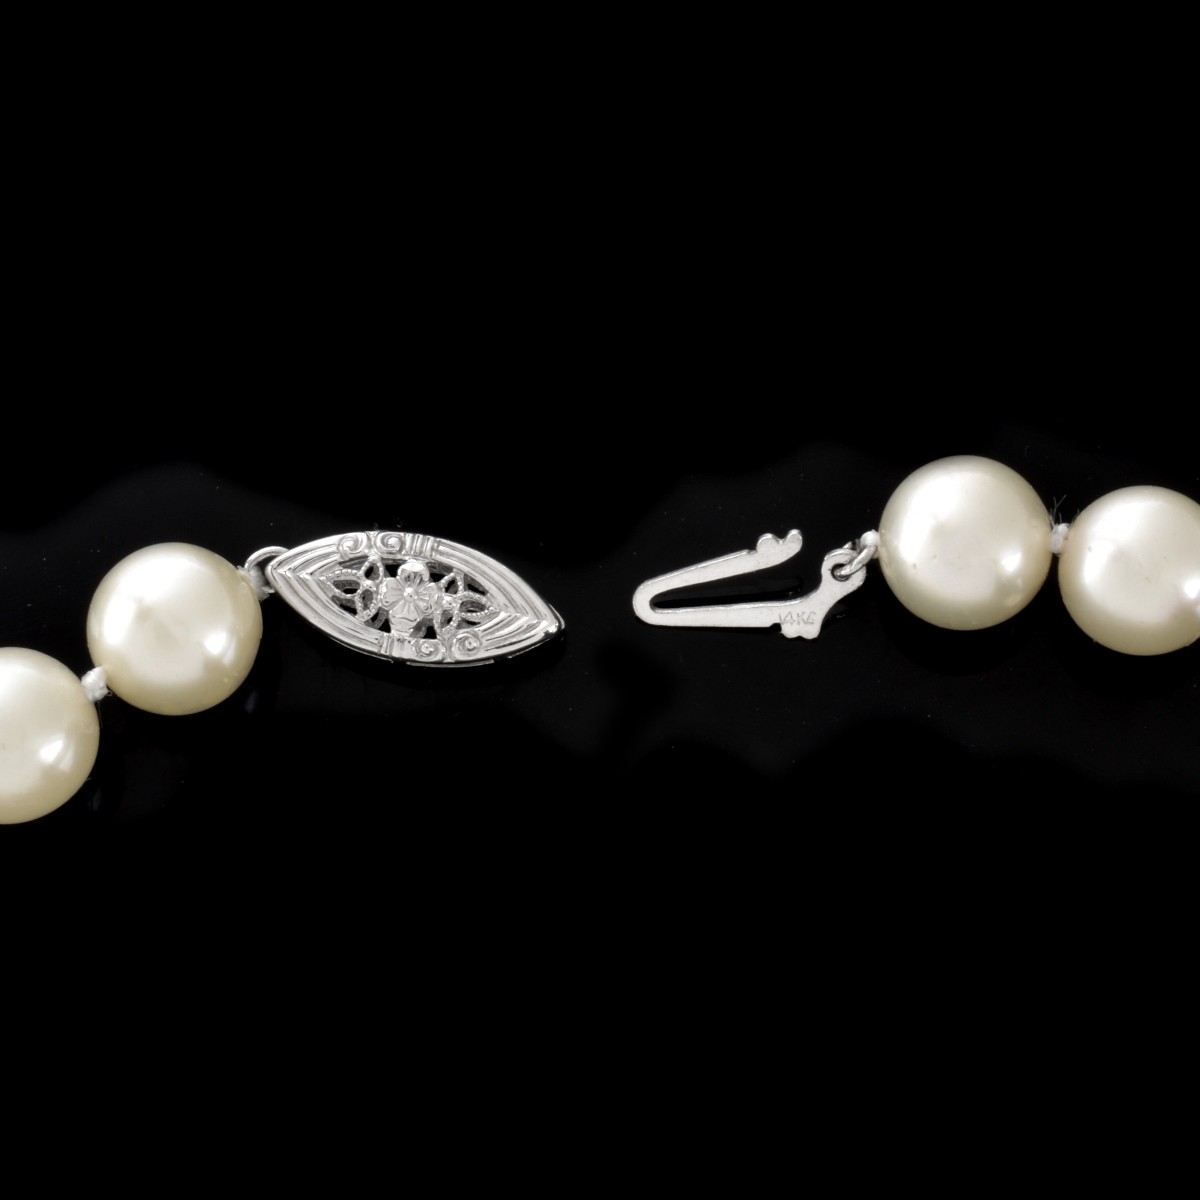 7.5-8.0mm Pearl Necklace